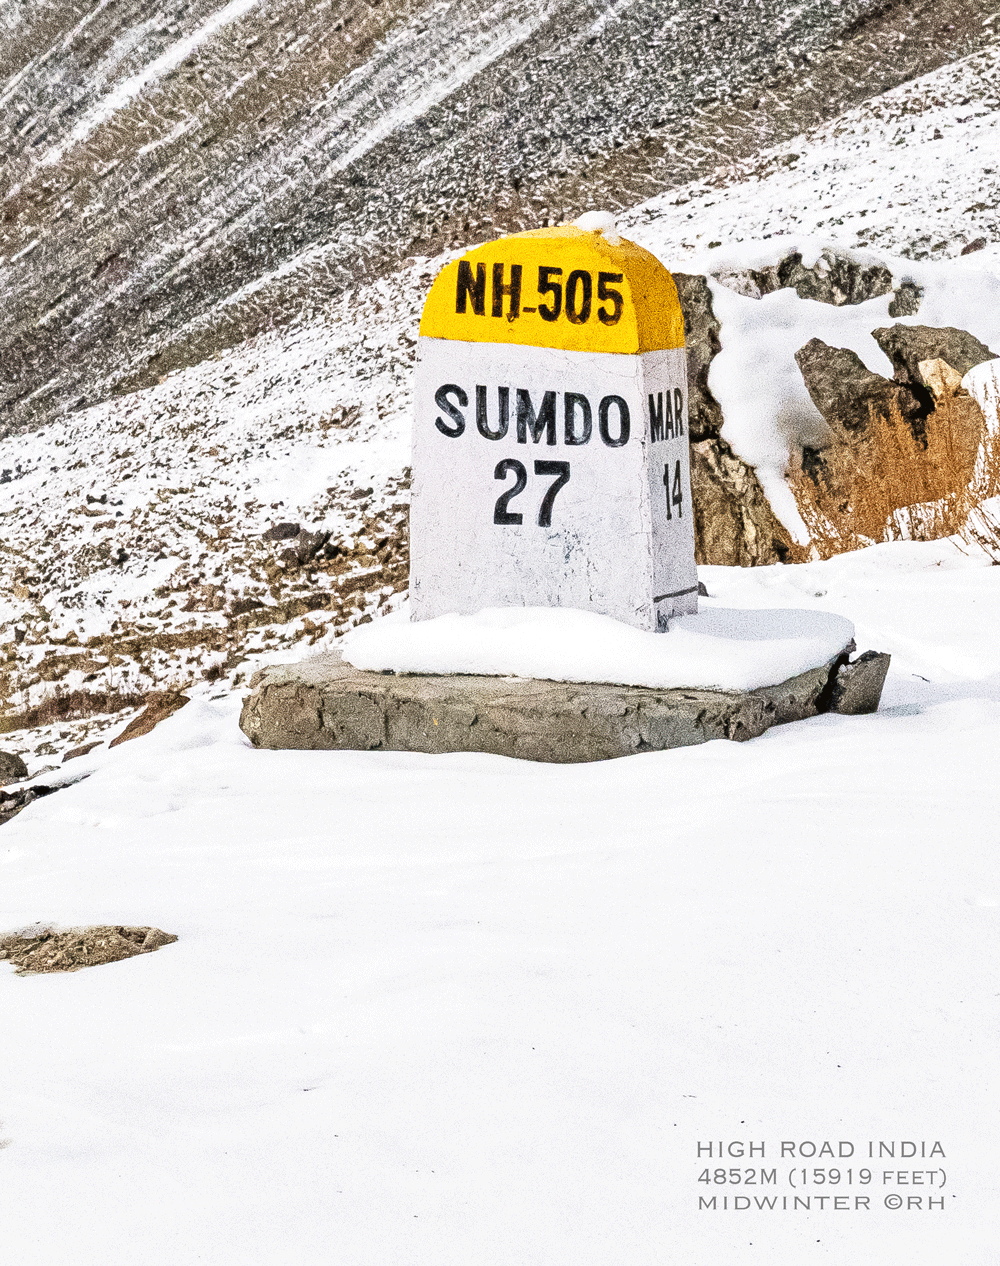 solo overland travel midwinter Indian highlands, Sumdo highway mileage road marker, image by Rick Hemi 